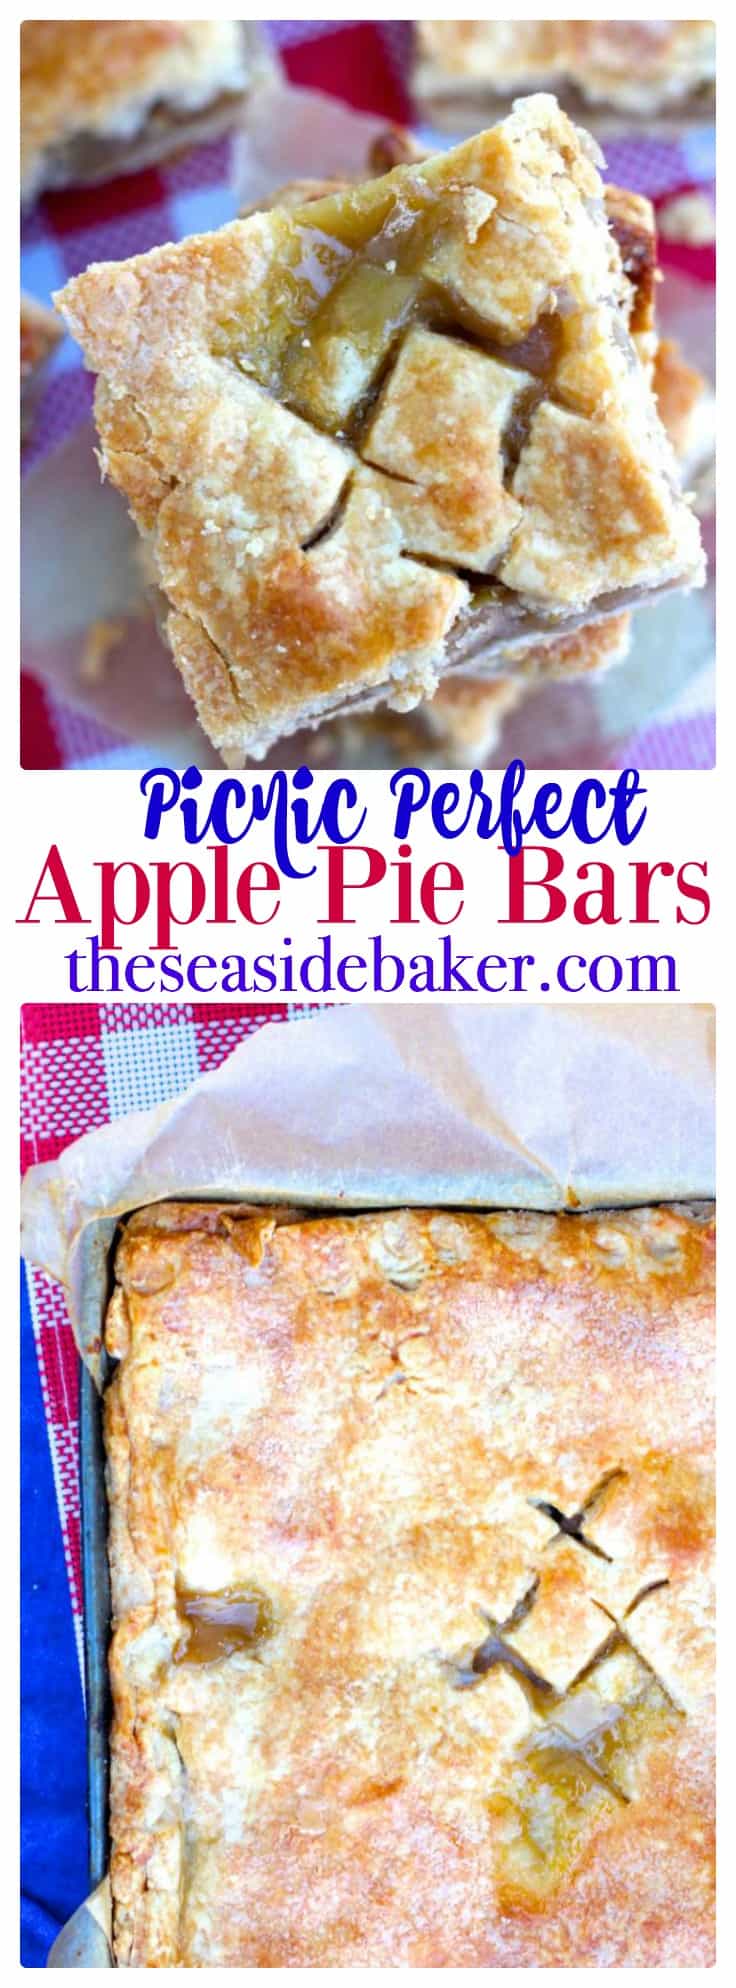 Thick buttery crust filled with sweet apple pie filling, making these the perfect slice and serve summer dessert